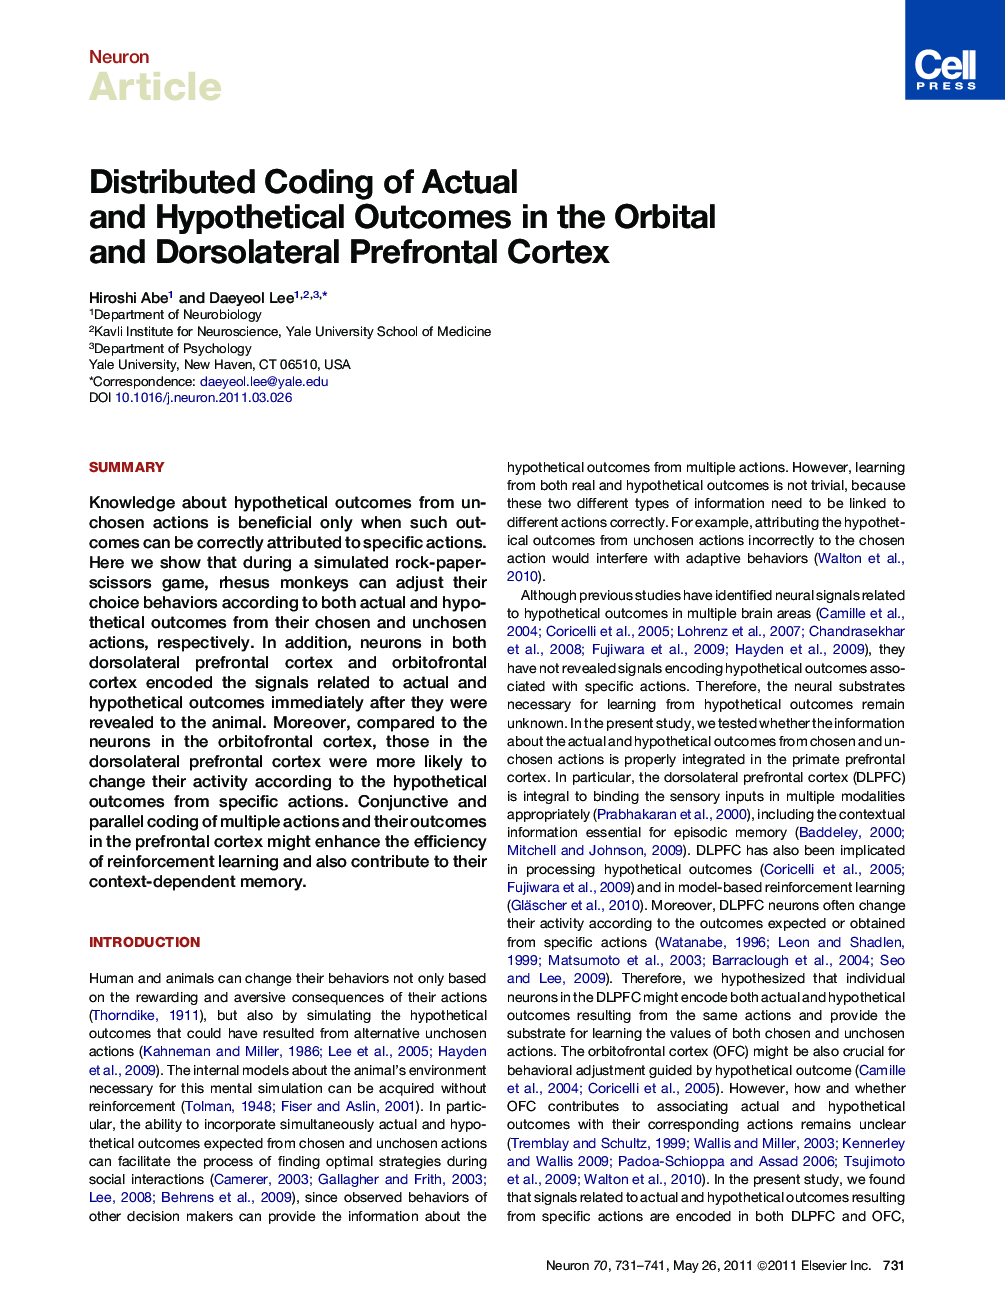 Distributed Coding of Actual and Hypothetical Outcomes in the Orbital and Dorsolateral Prefrontal Cortex